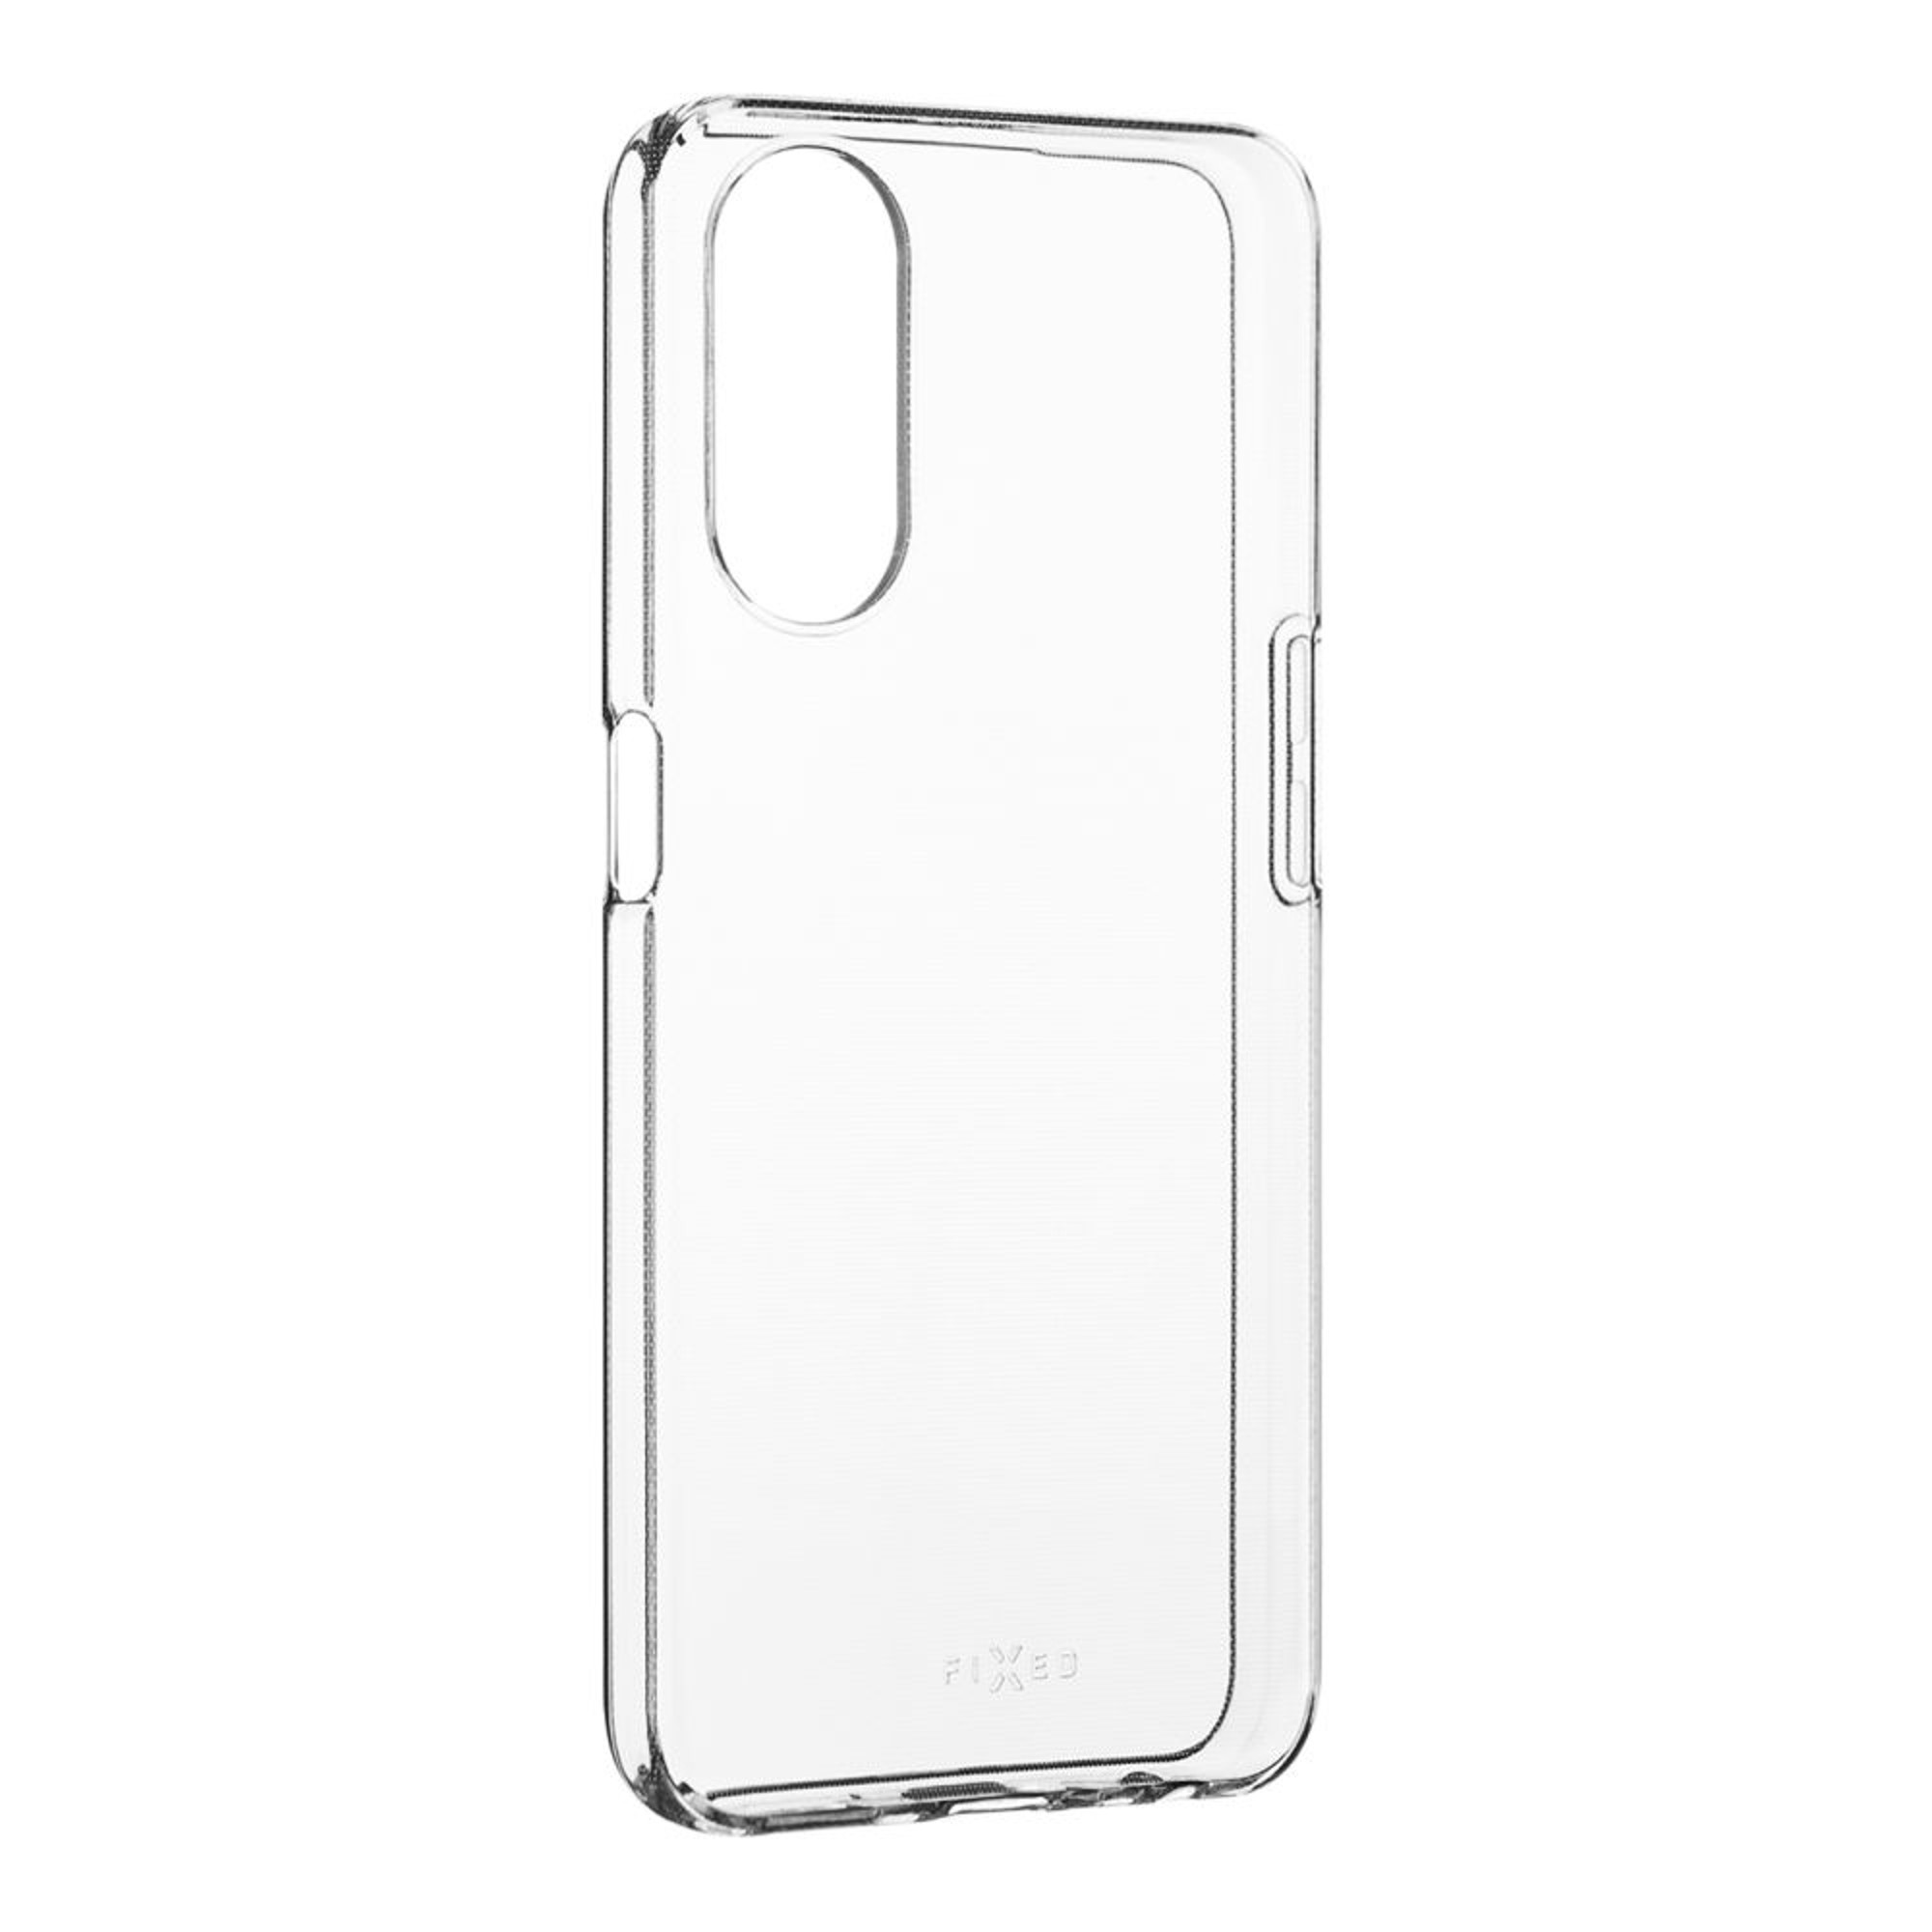 5G, Transparent A78 FIXED FIXTCC-1144, Oppo, Backcover,